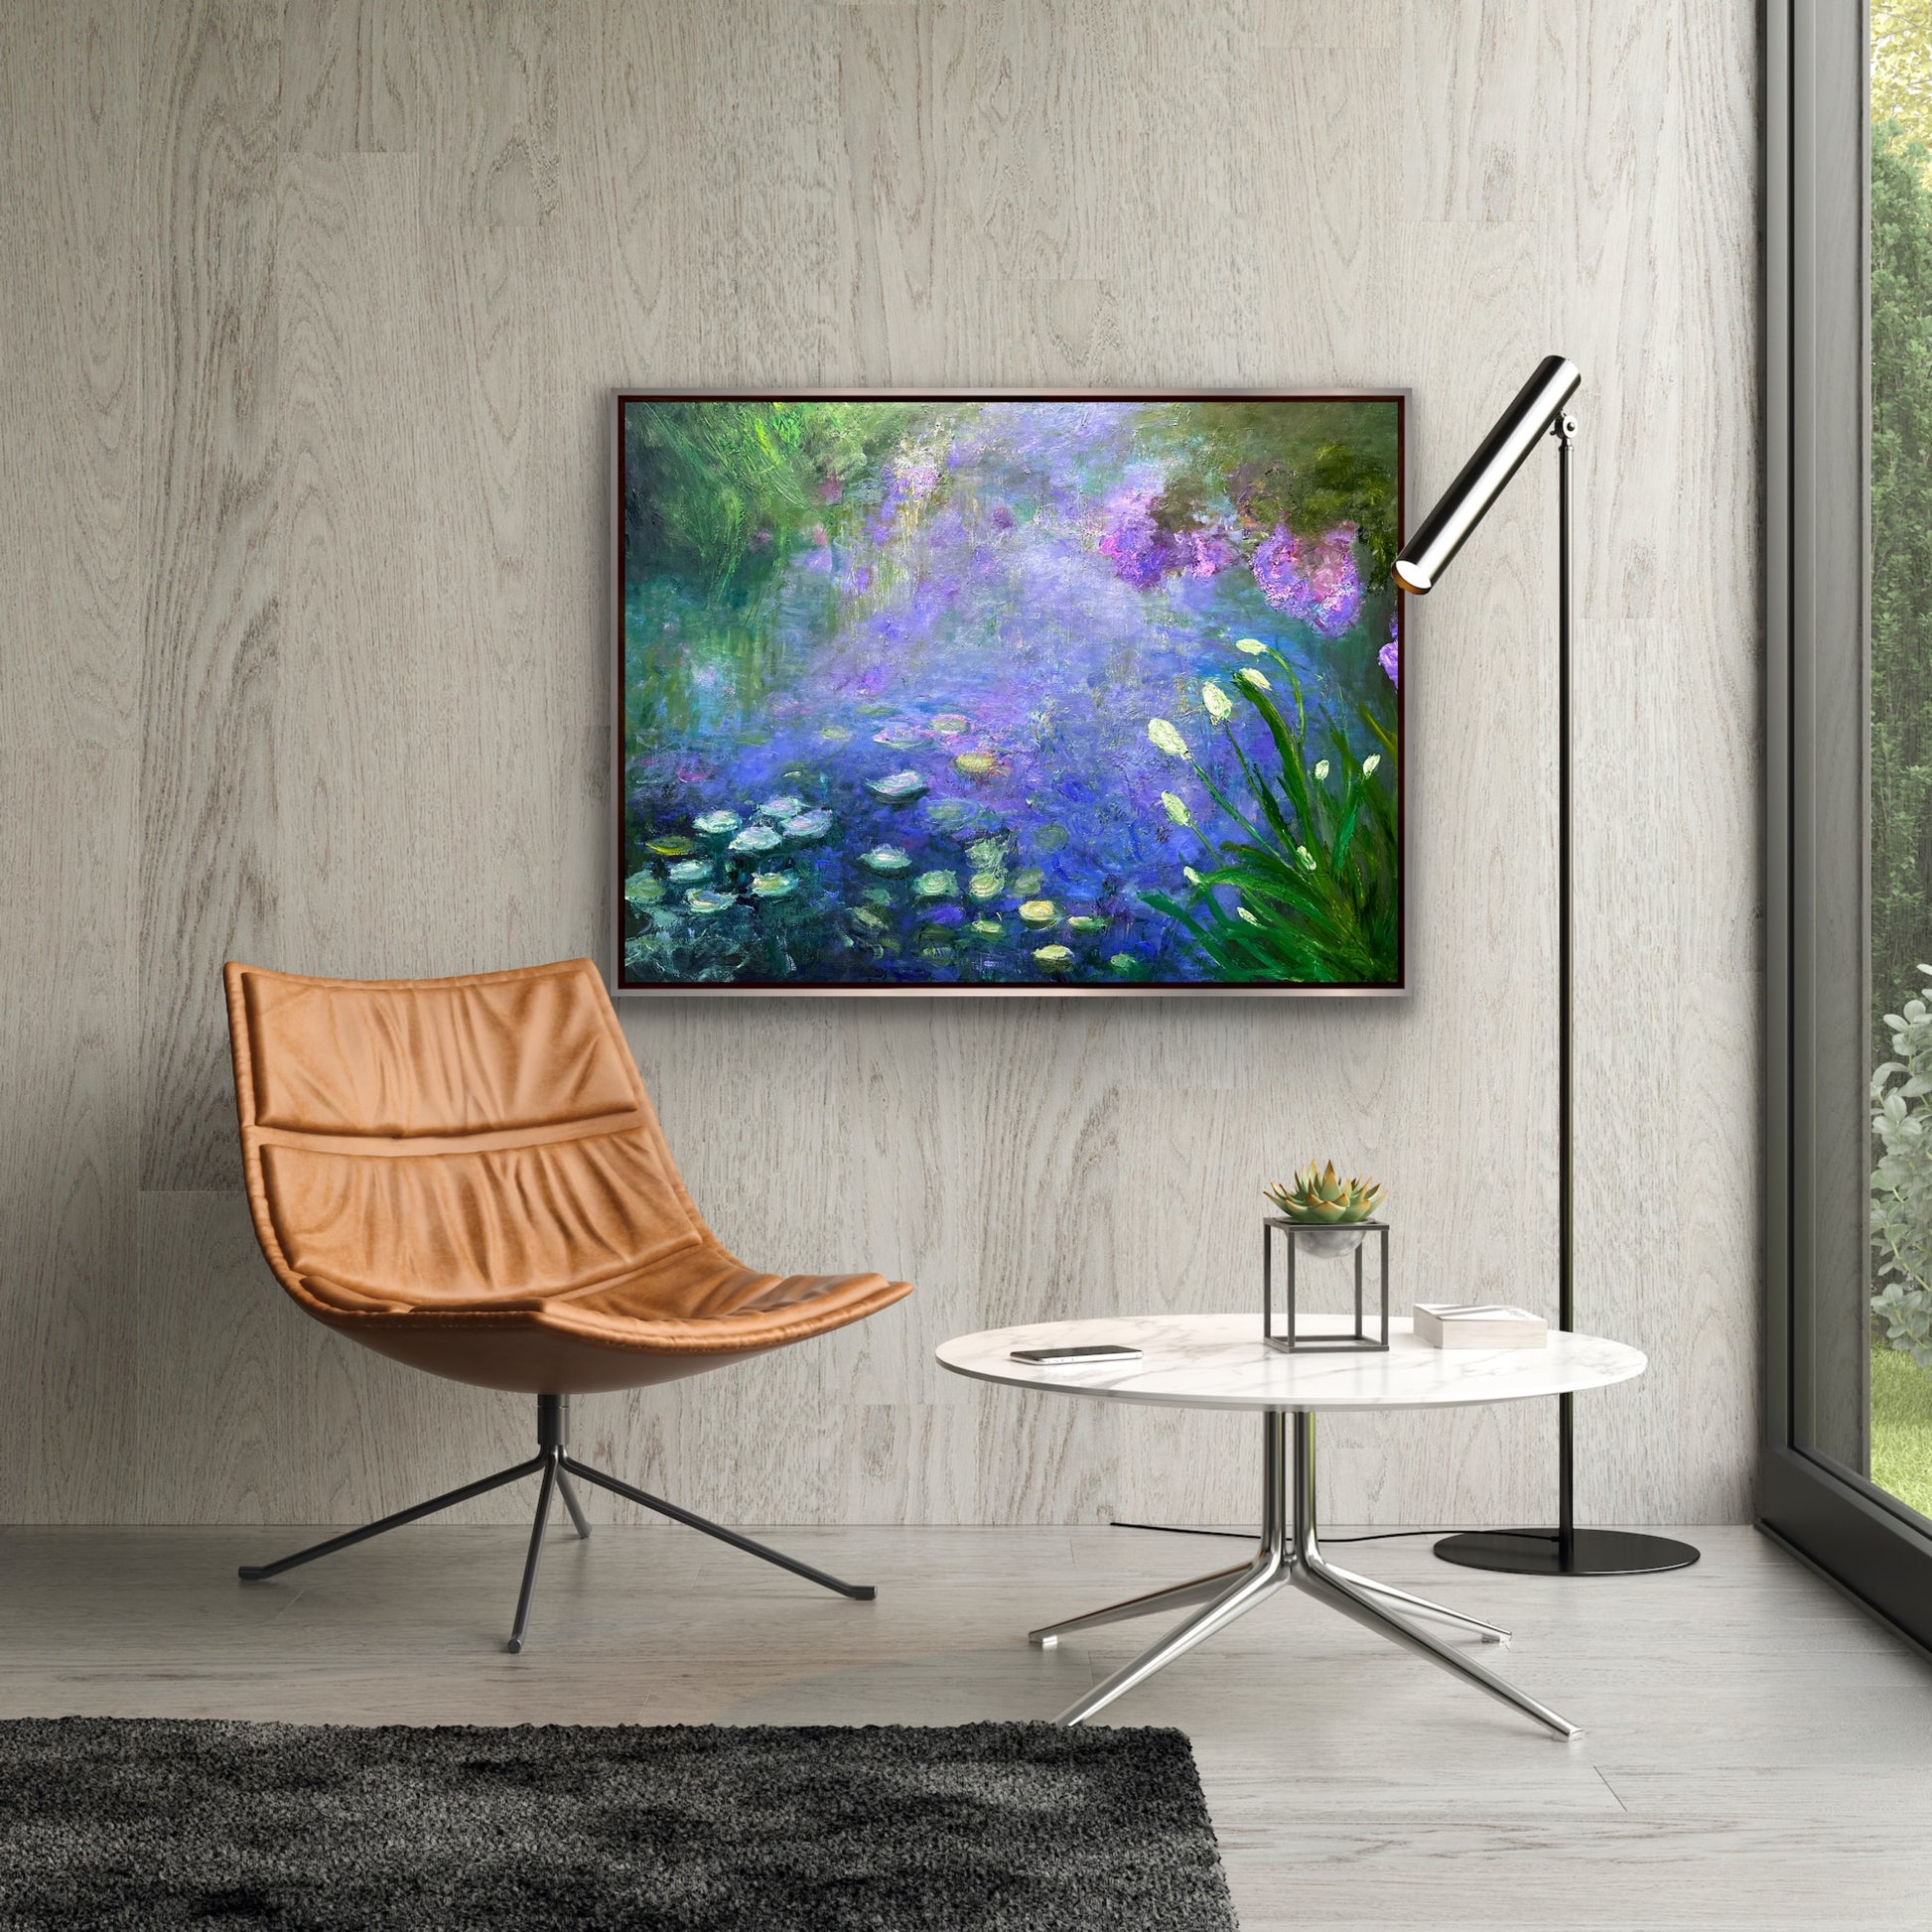 Monet-inspired abstract impressionist oil painting of a water lily scene in tones of lavenders, pinks and greens.